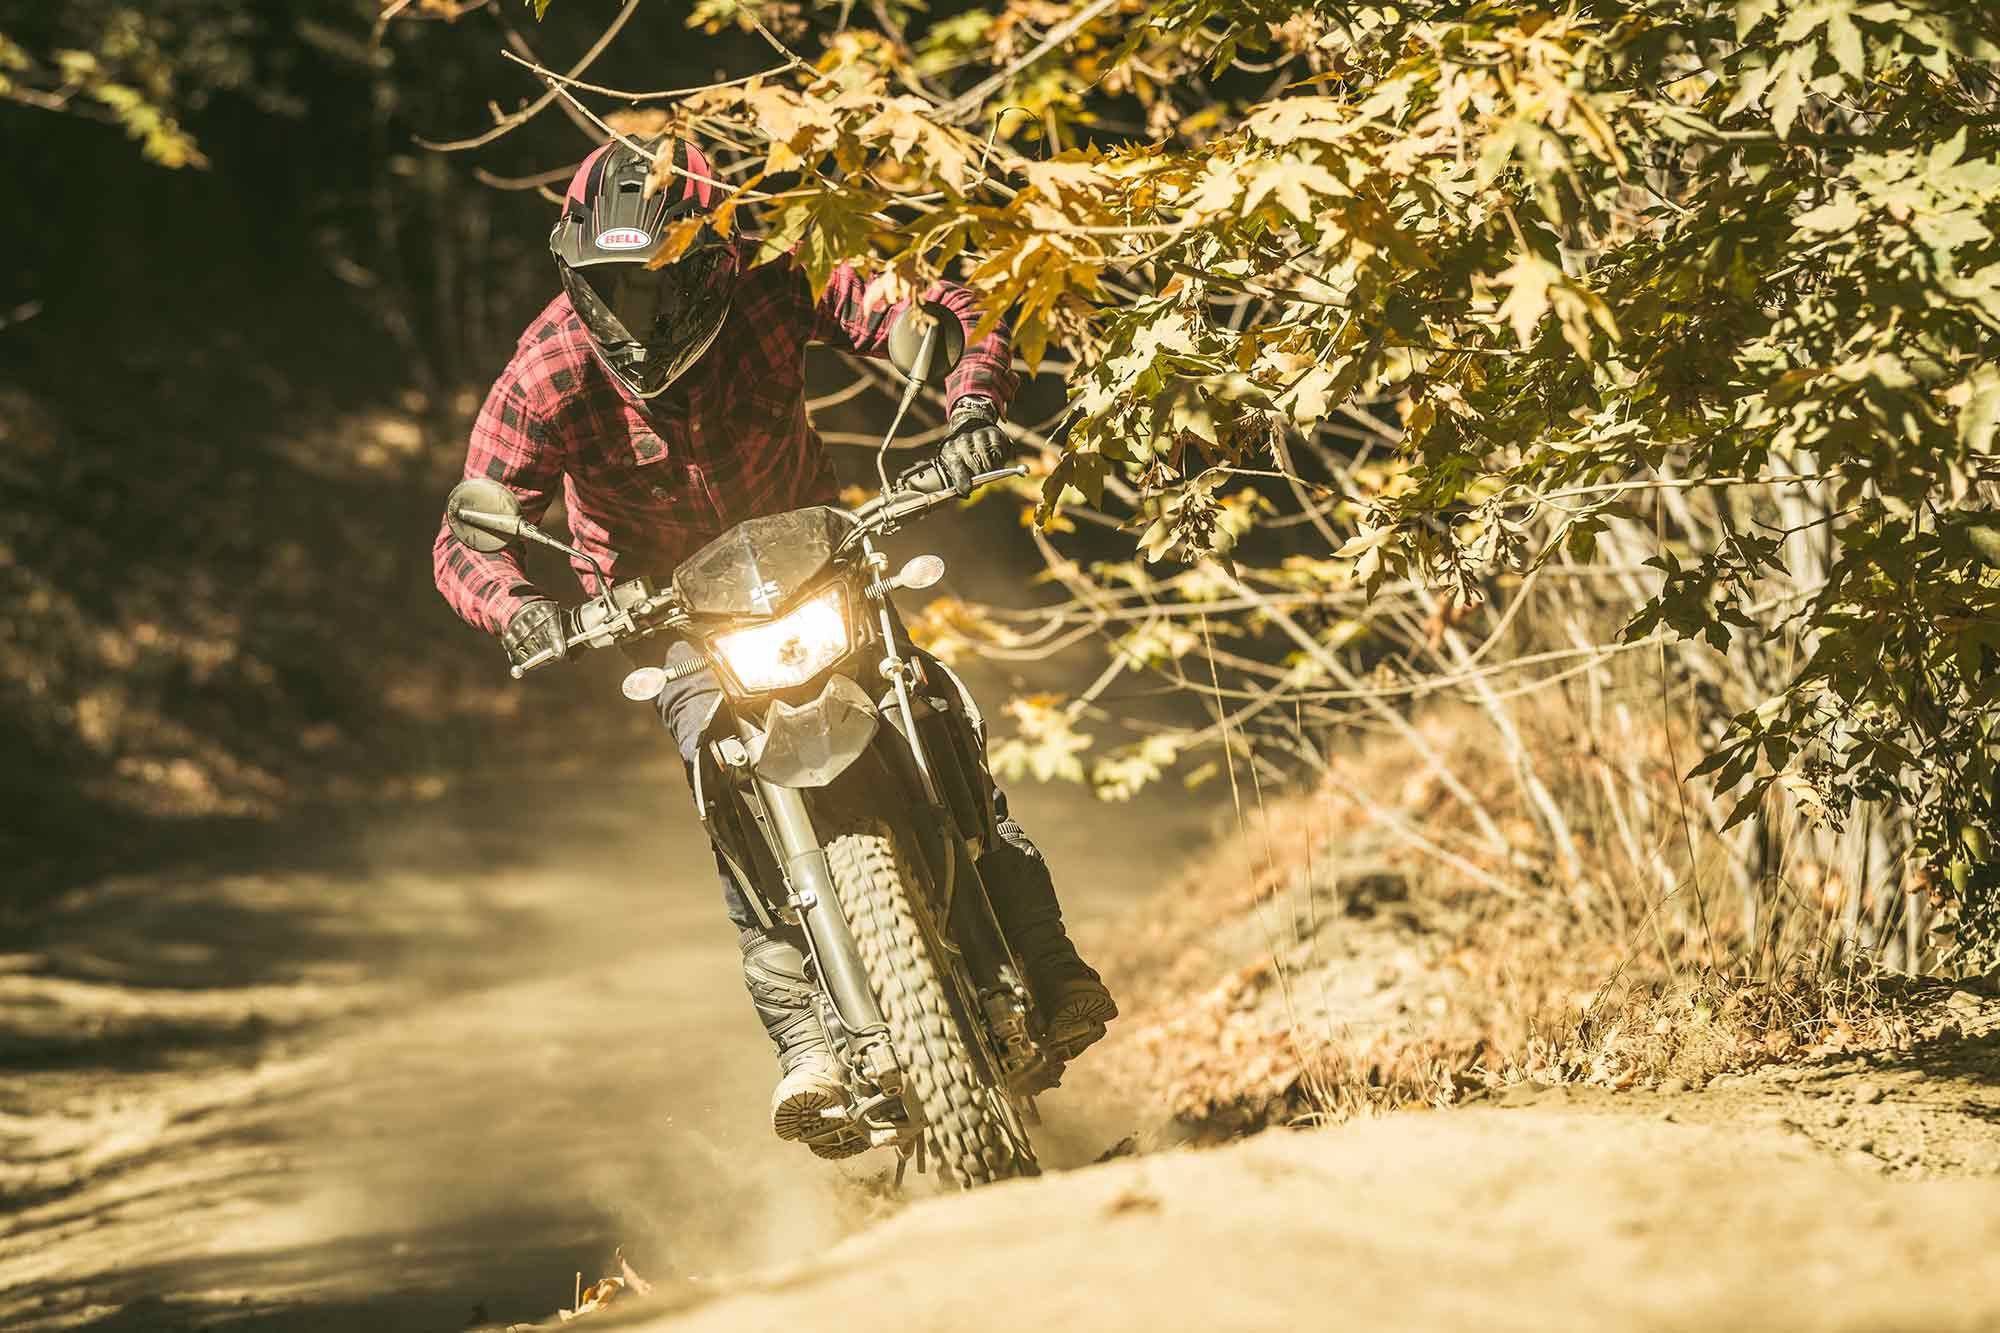 Dual sport and adventure motorcycles are now available to rent at Riders Share.